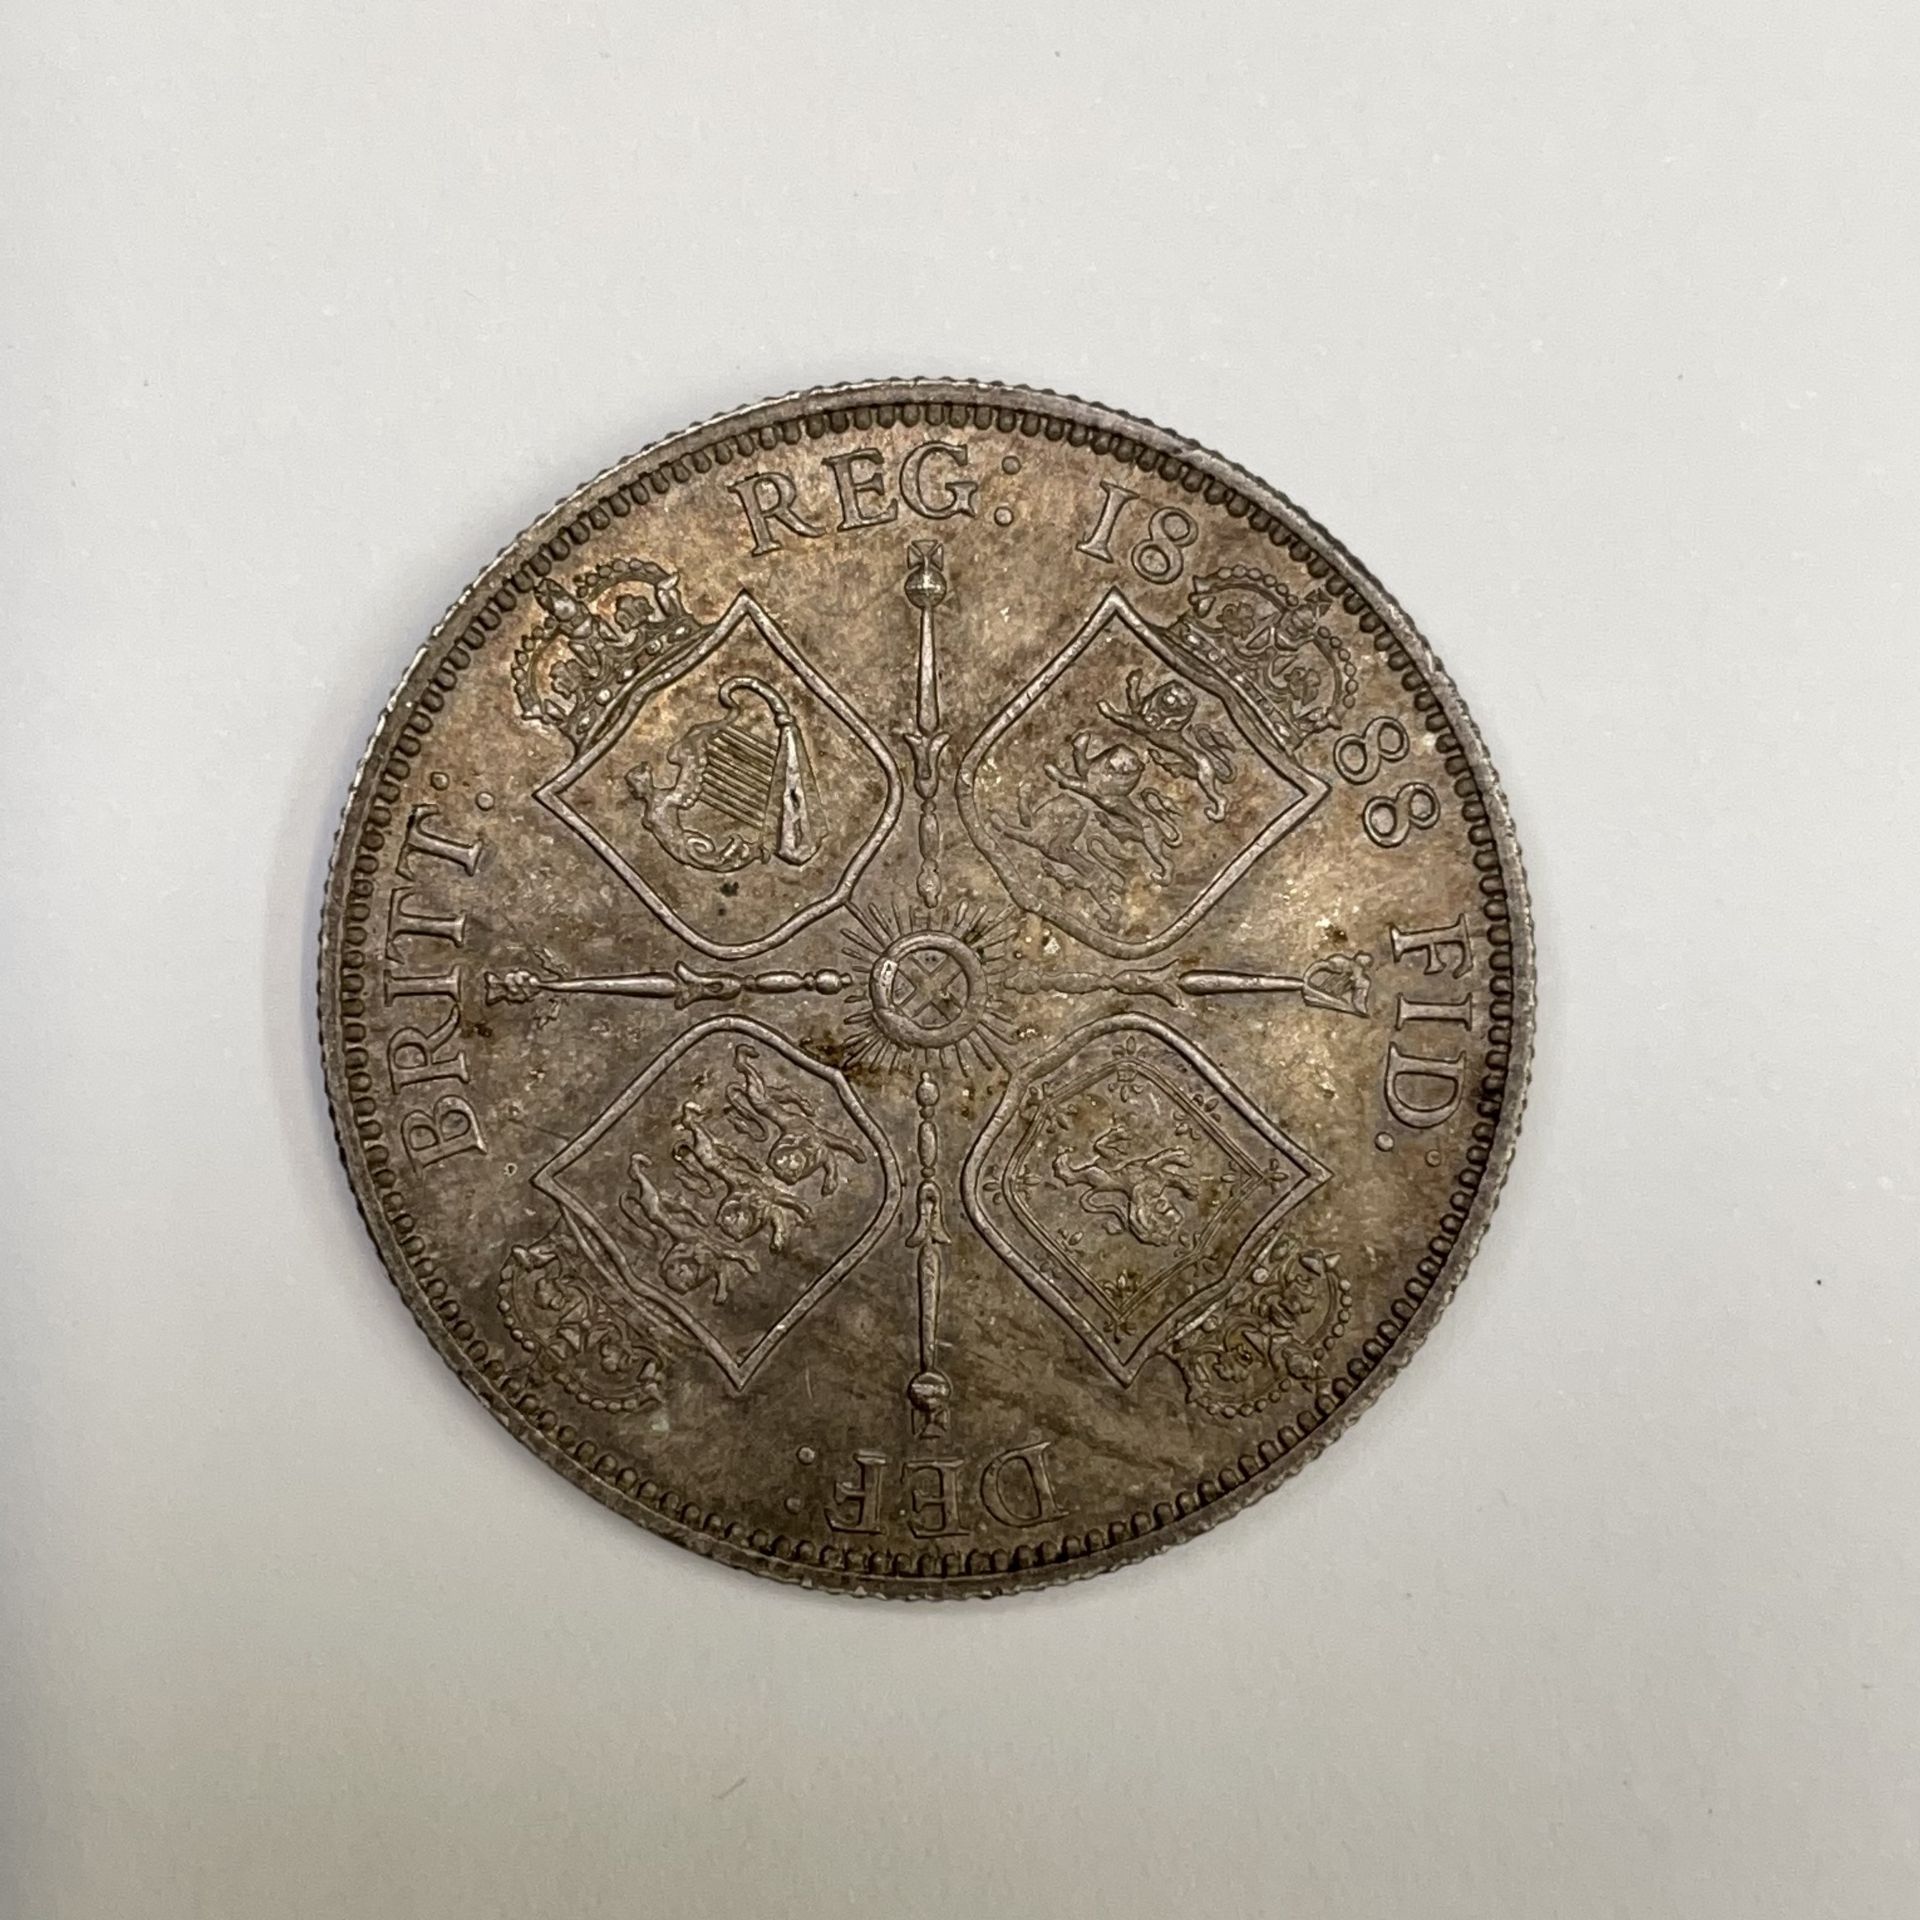 Great Britain and World Coins An 1888 silver 2/- coin (EF+), a circa 1800 copper trading - Image 7 of 11